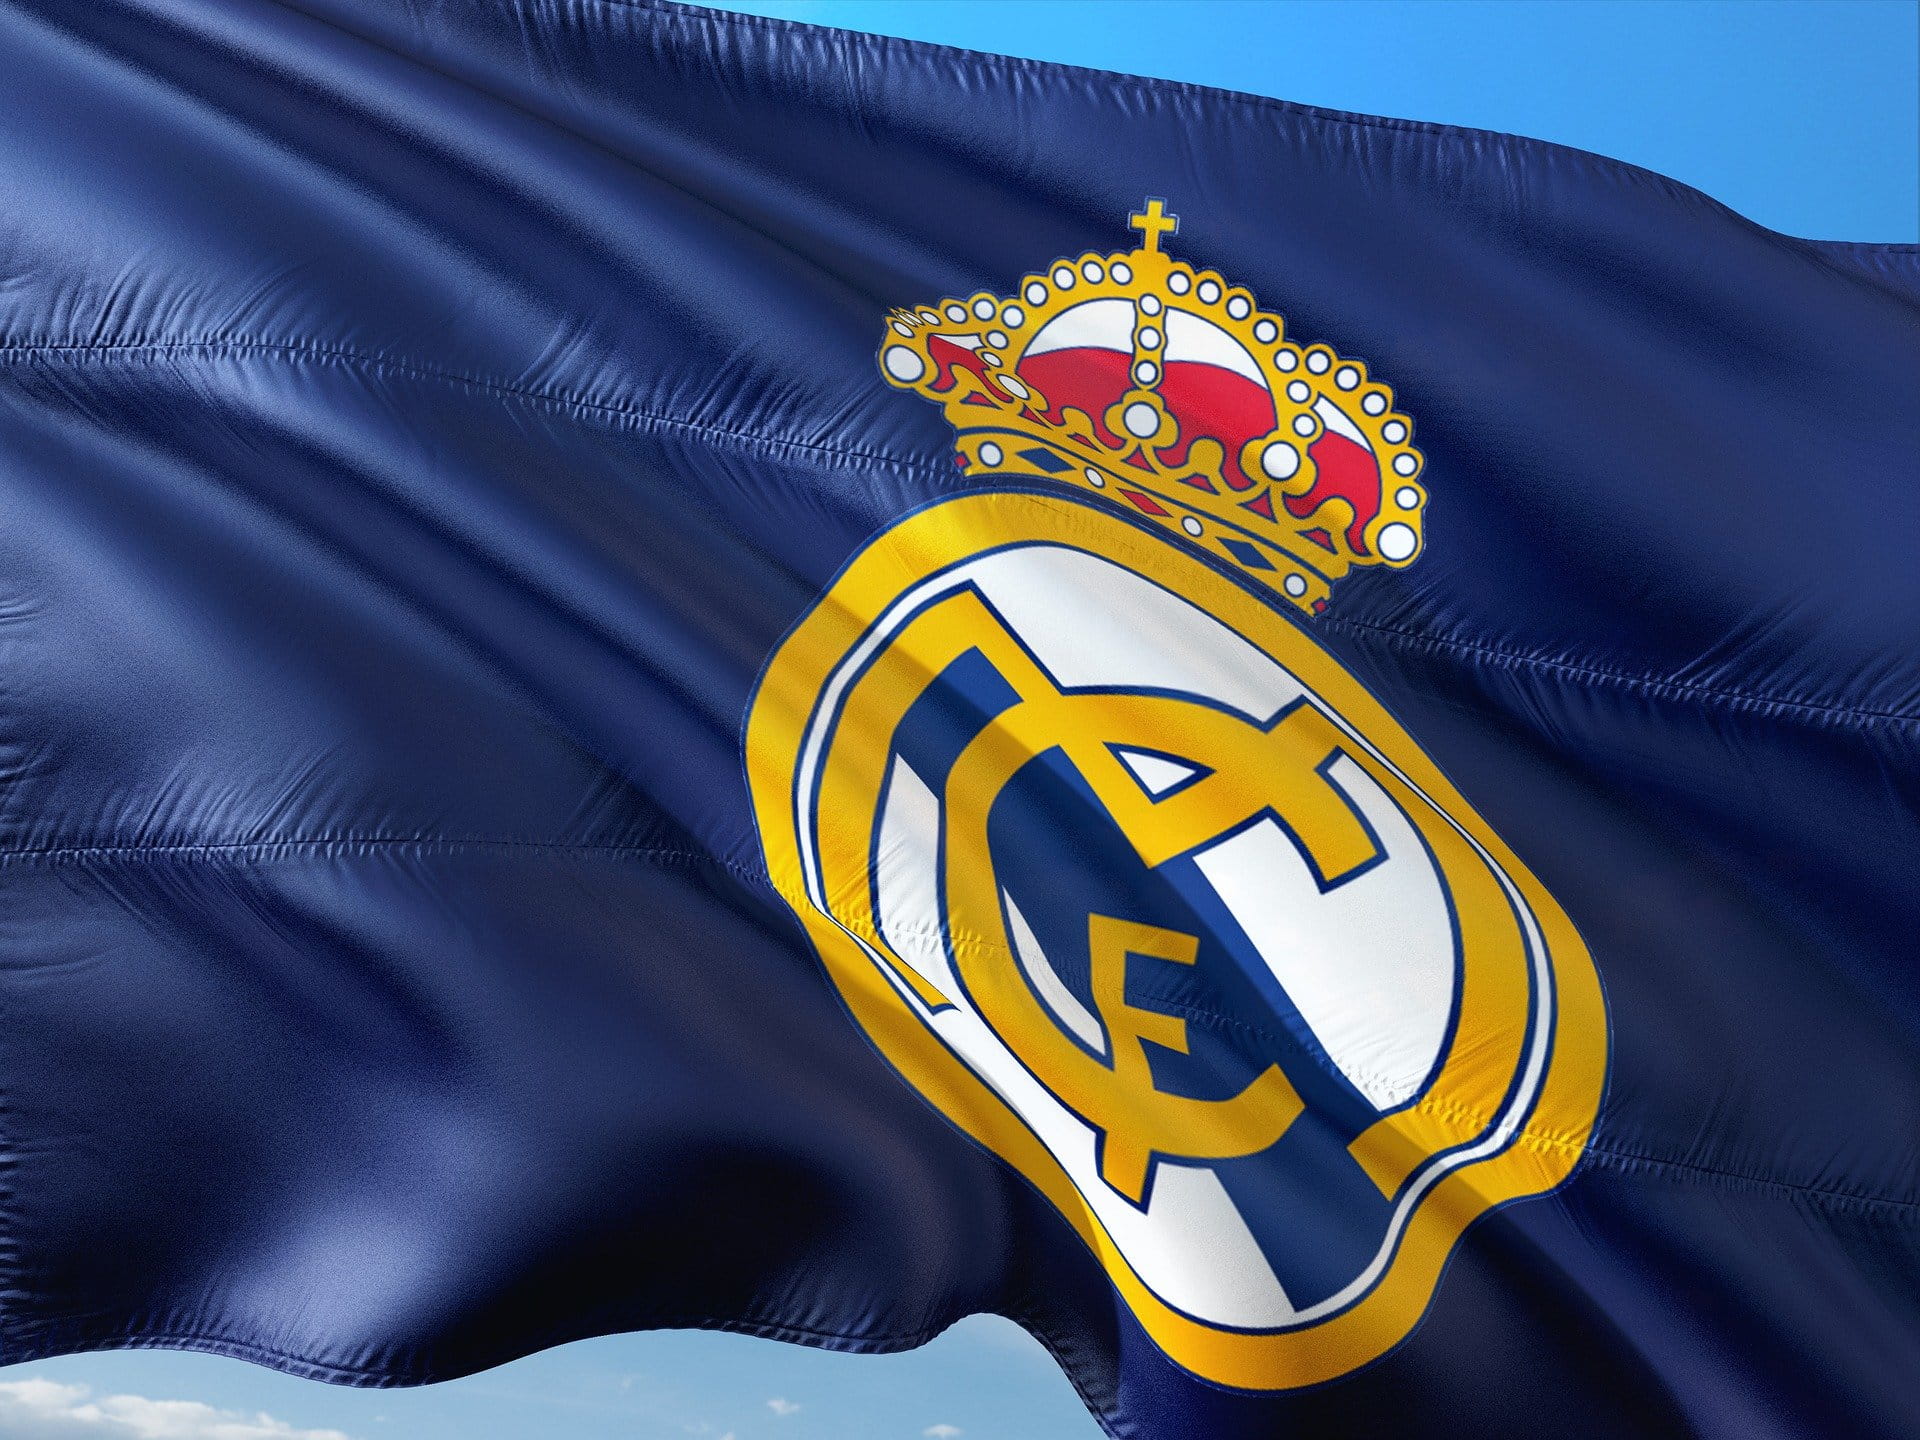 Real Madrid flag blowing in the wind